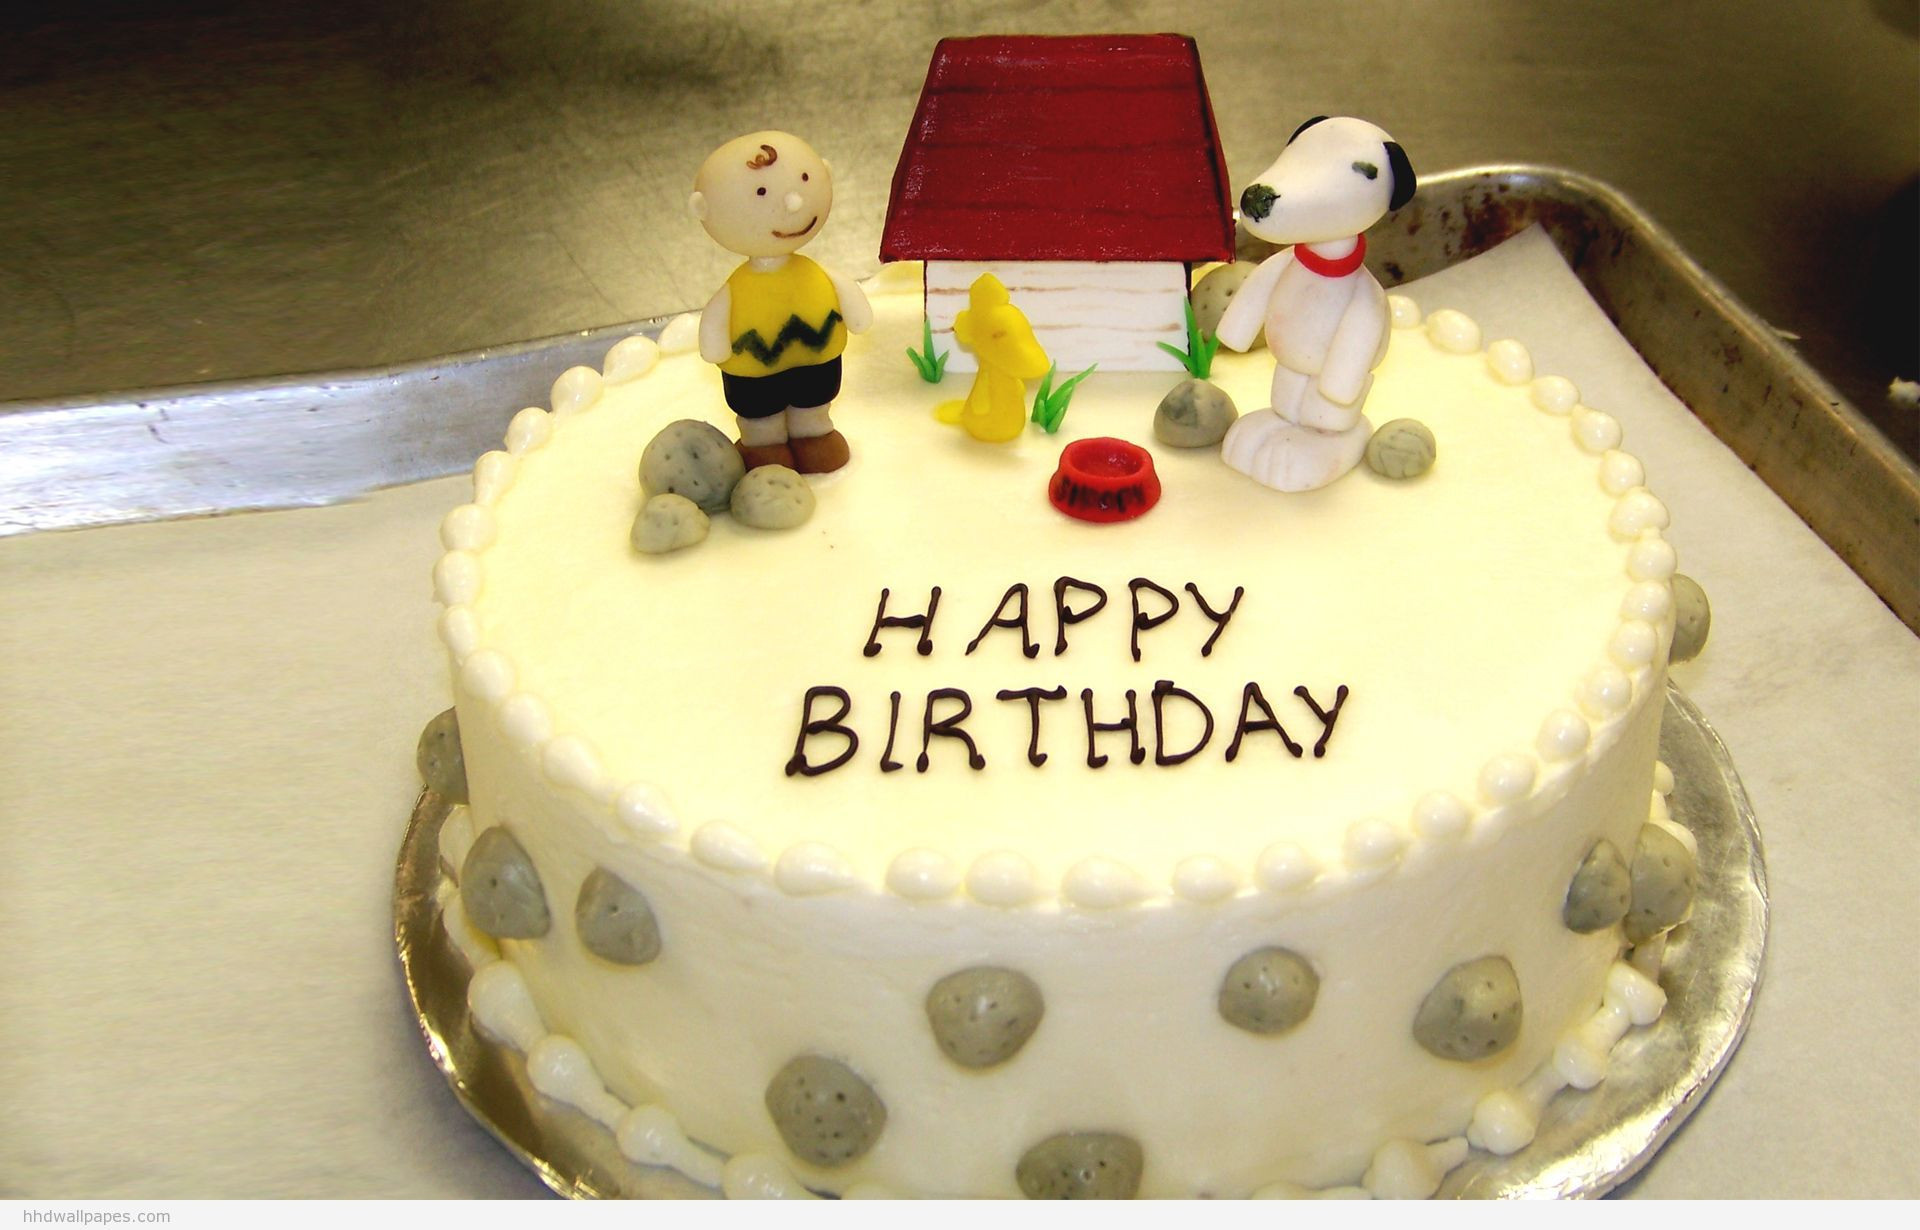 Birthday Cake Images With Name
 Download Happy Birthday Cake With Name Wallpaper Gallery